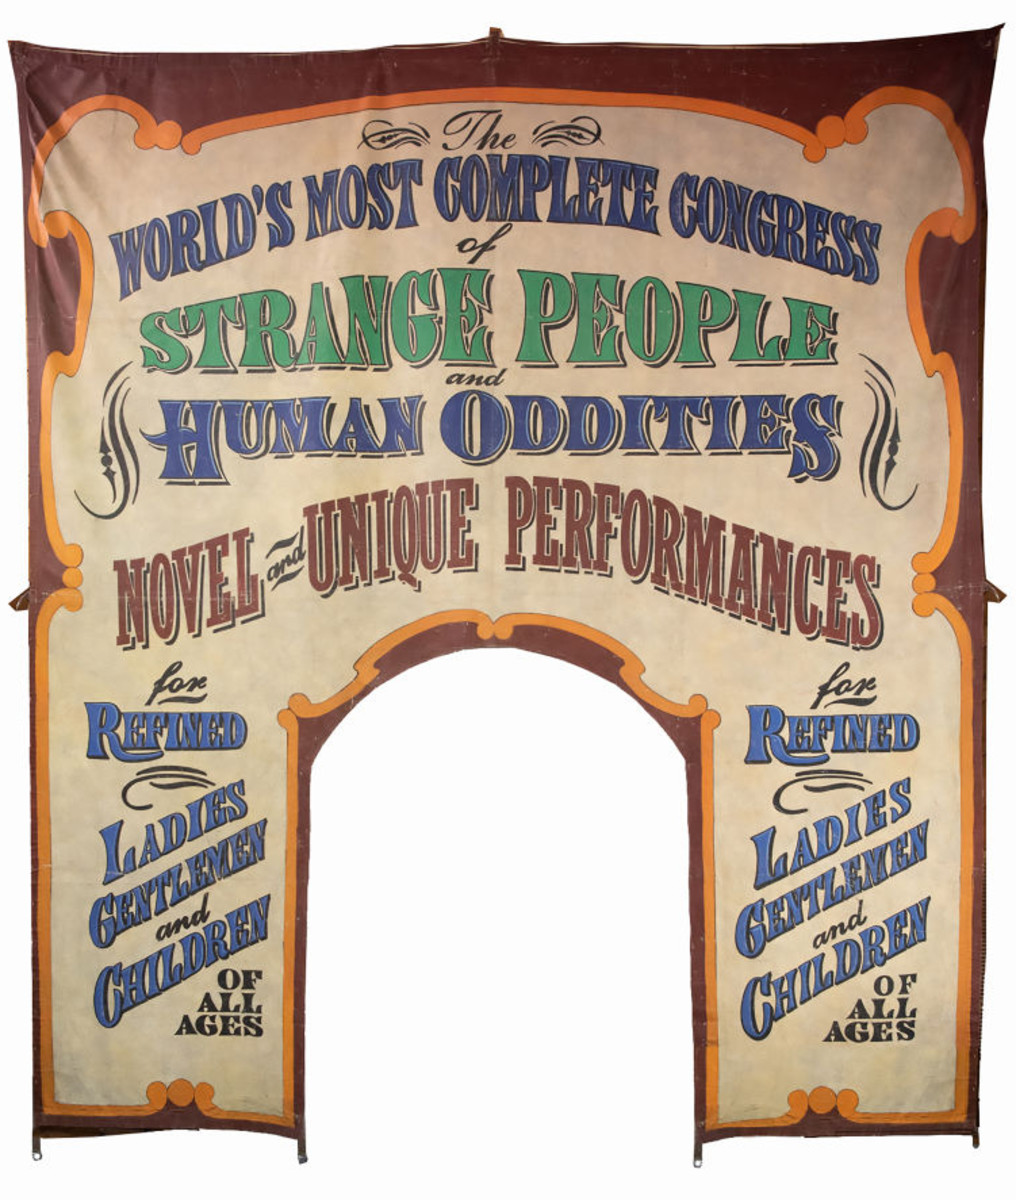 A massive circus tent entry banner reading, "The World's Most Complete Congress of Strange People and Human Oddities/Novel and Unique Performances/for Refined Ladies, Gentlemen, and Children of all ages." Made out of rubberized canvas and single sided, the banner is wonderfully detailed with a maroon border with orange interior border and would make a neat display piece; 14 feet 6 inches x 12 feet 7 inches. Estimate: $4,000-$6,000.